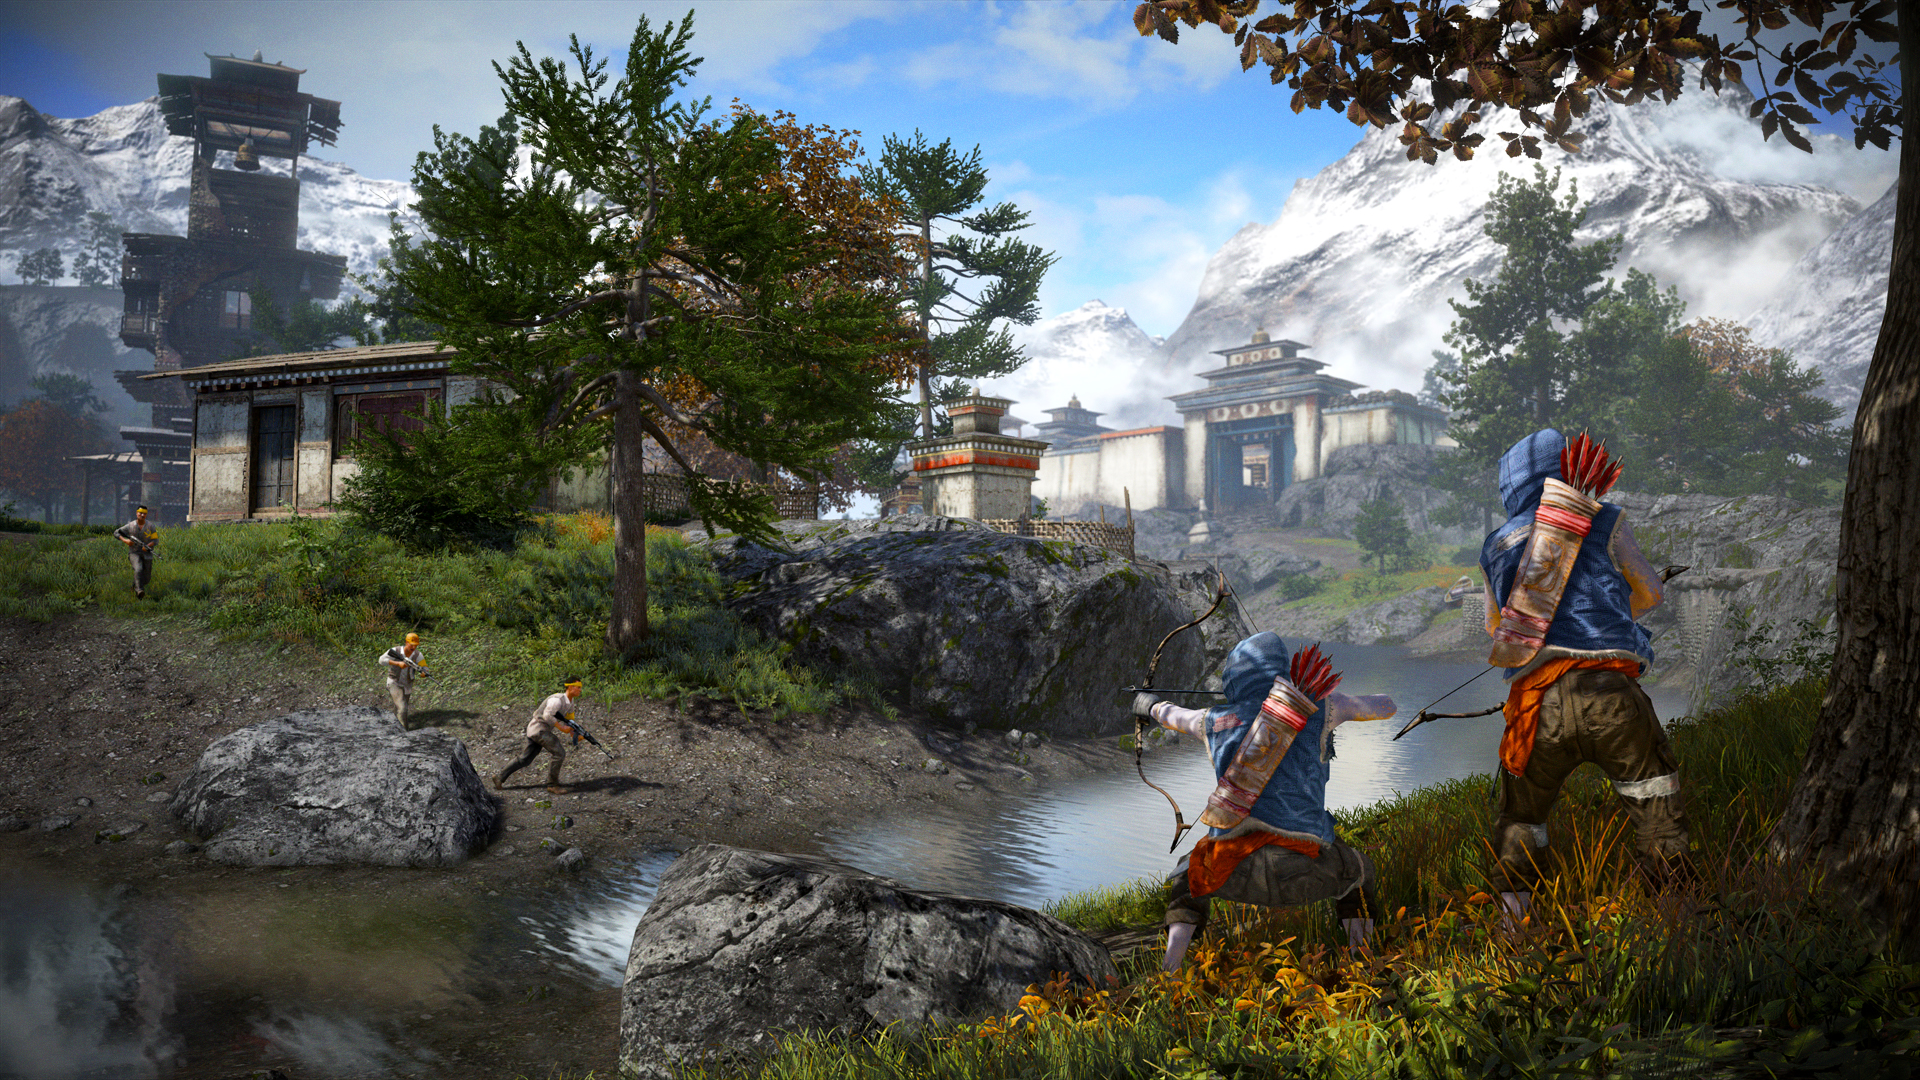 far cry 4 pc download